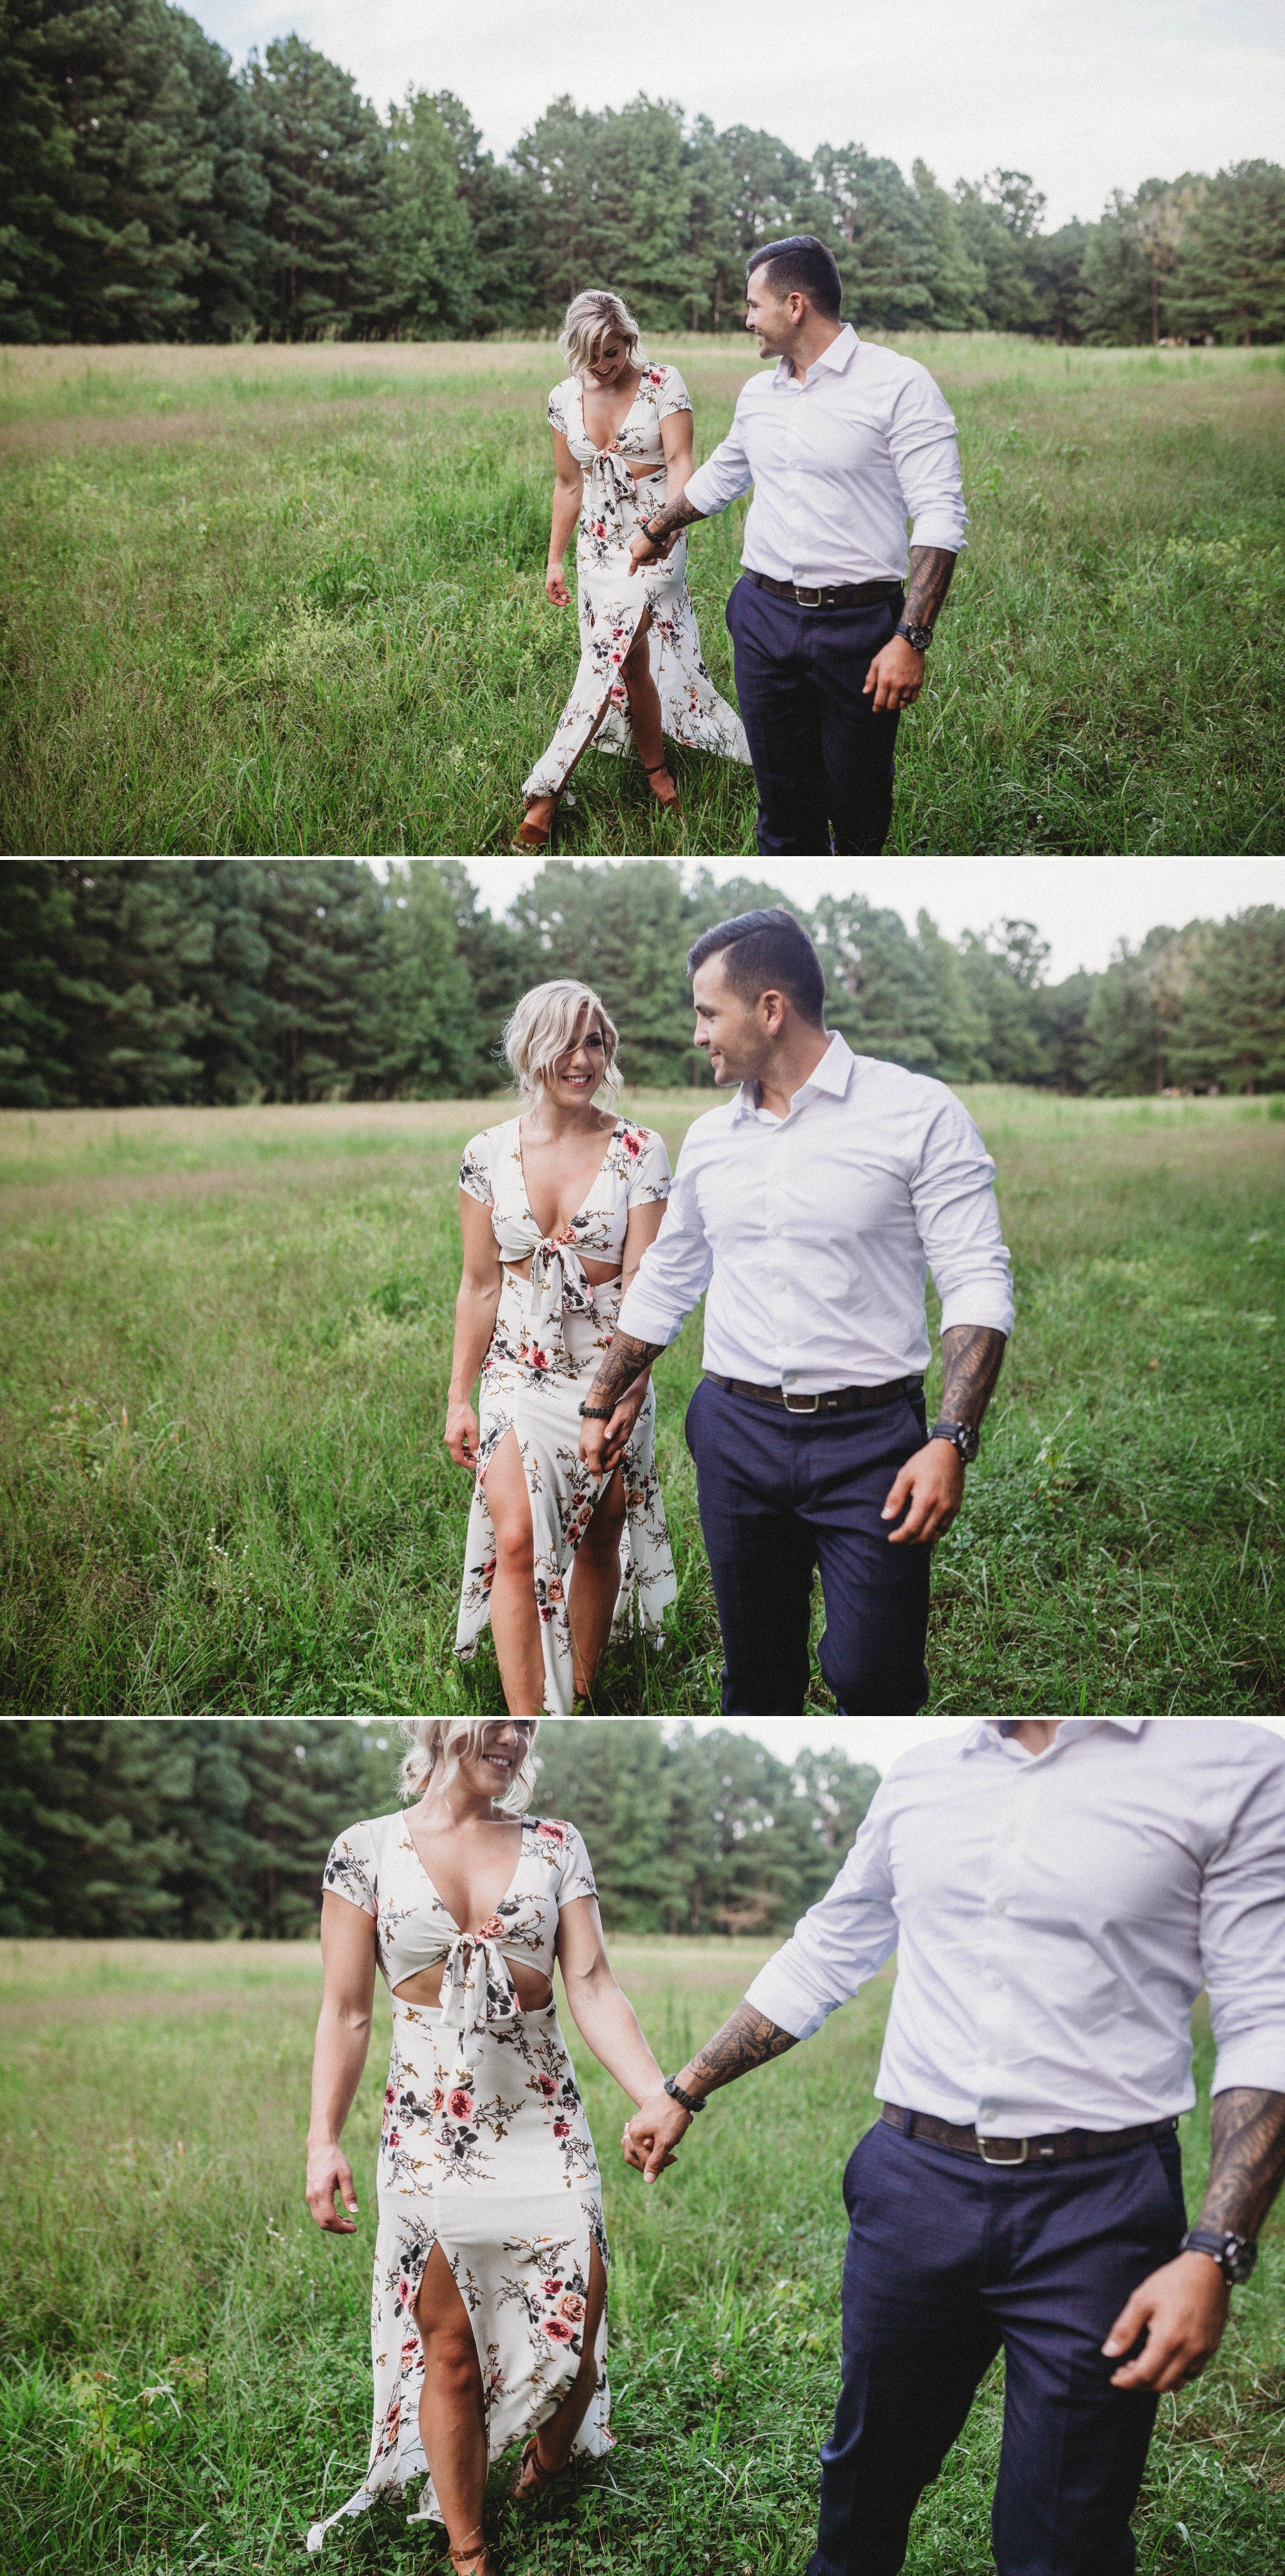 Cassie + Jesse - Engagement Photography Session in a field - Fayetteville North Carolina Wedding Photographer 8.jpg